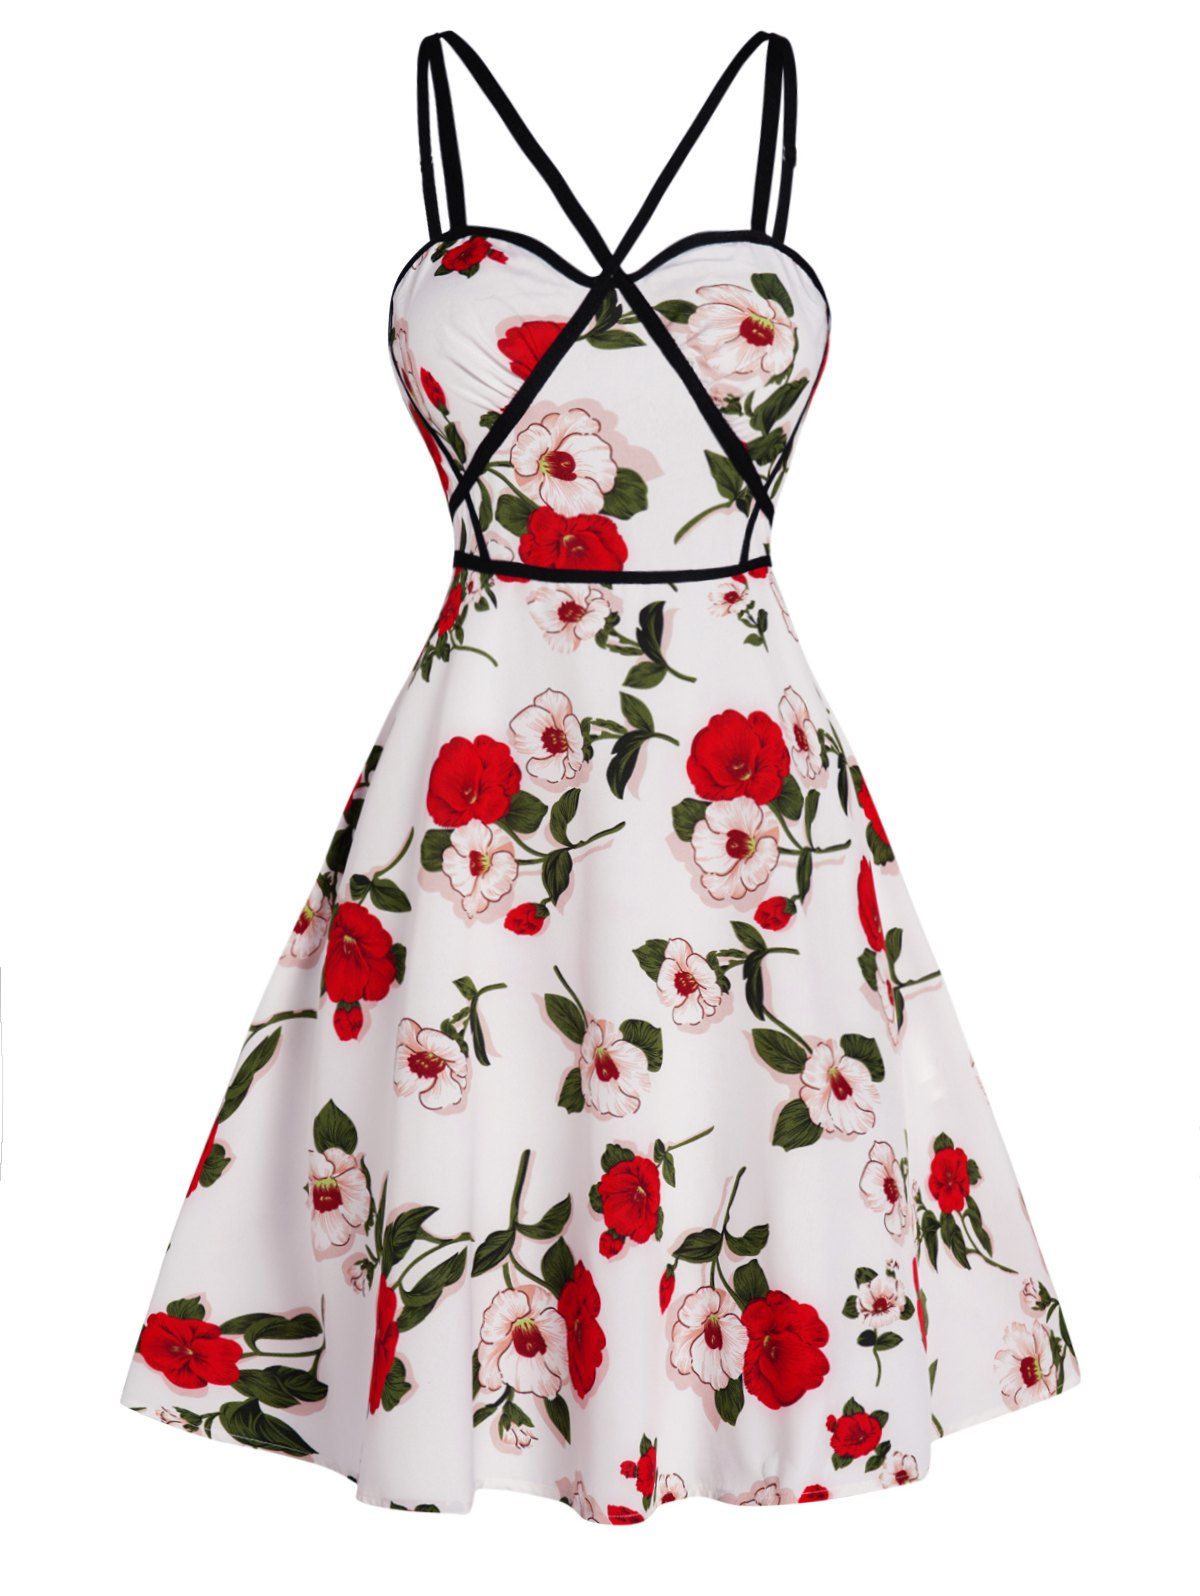 Flower Print Mini Sundress Contrast Piping Crossover Adjustable Strap A Line Dress - WHITE M